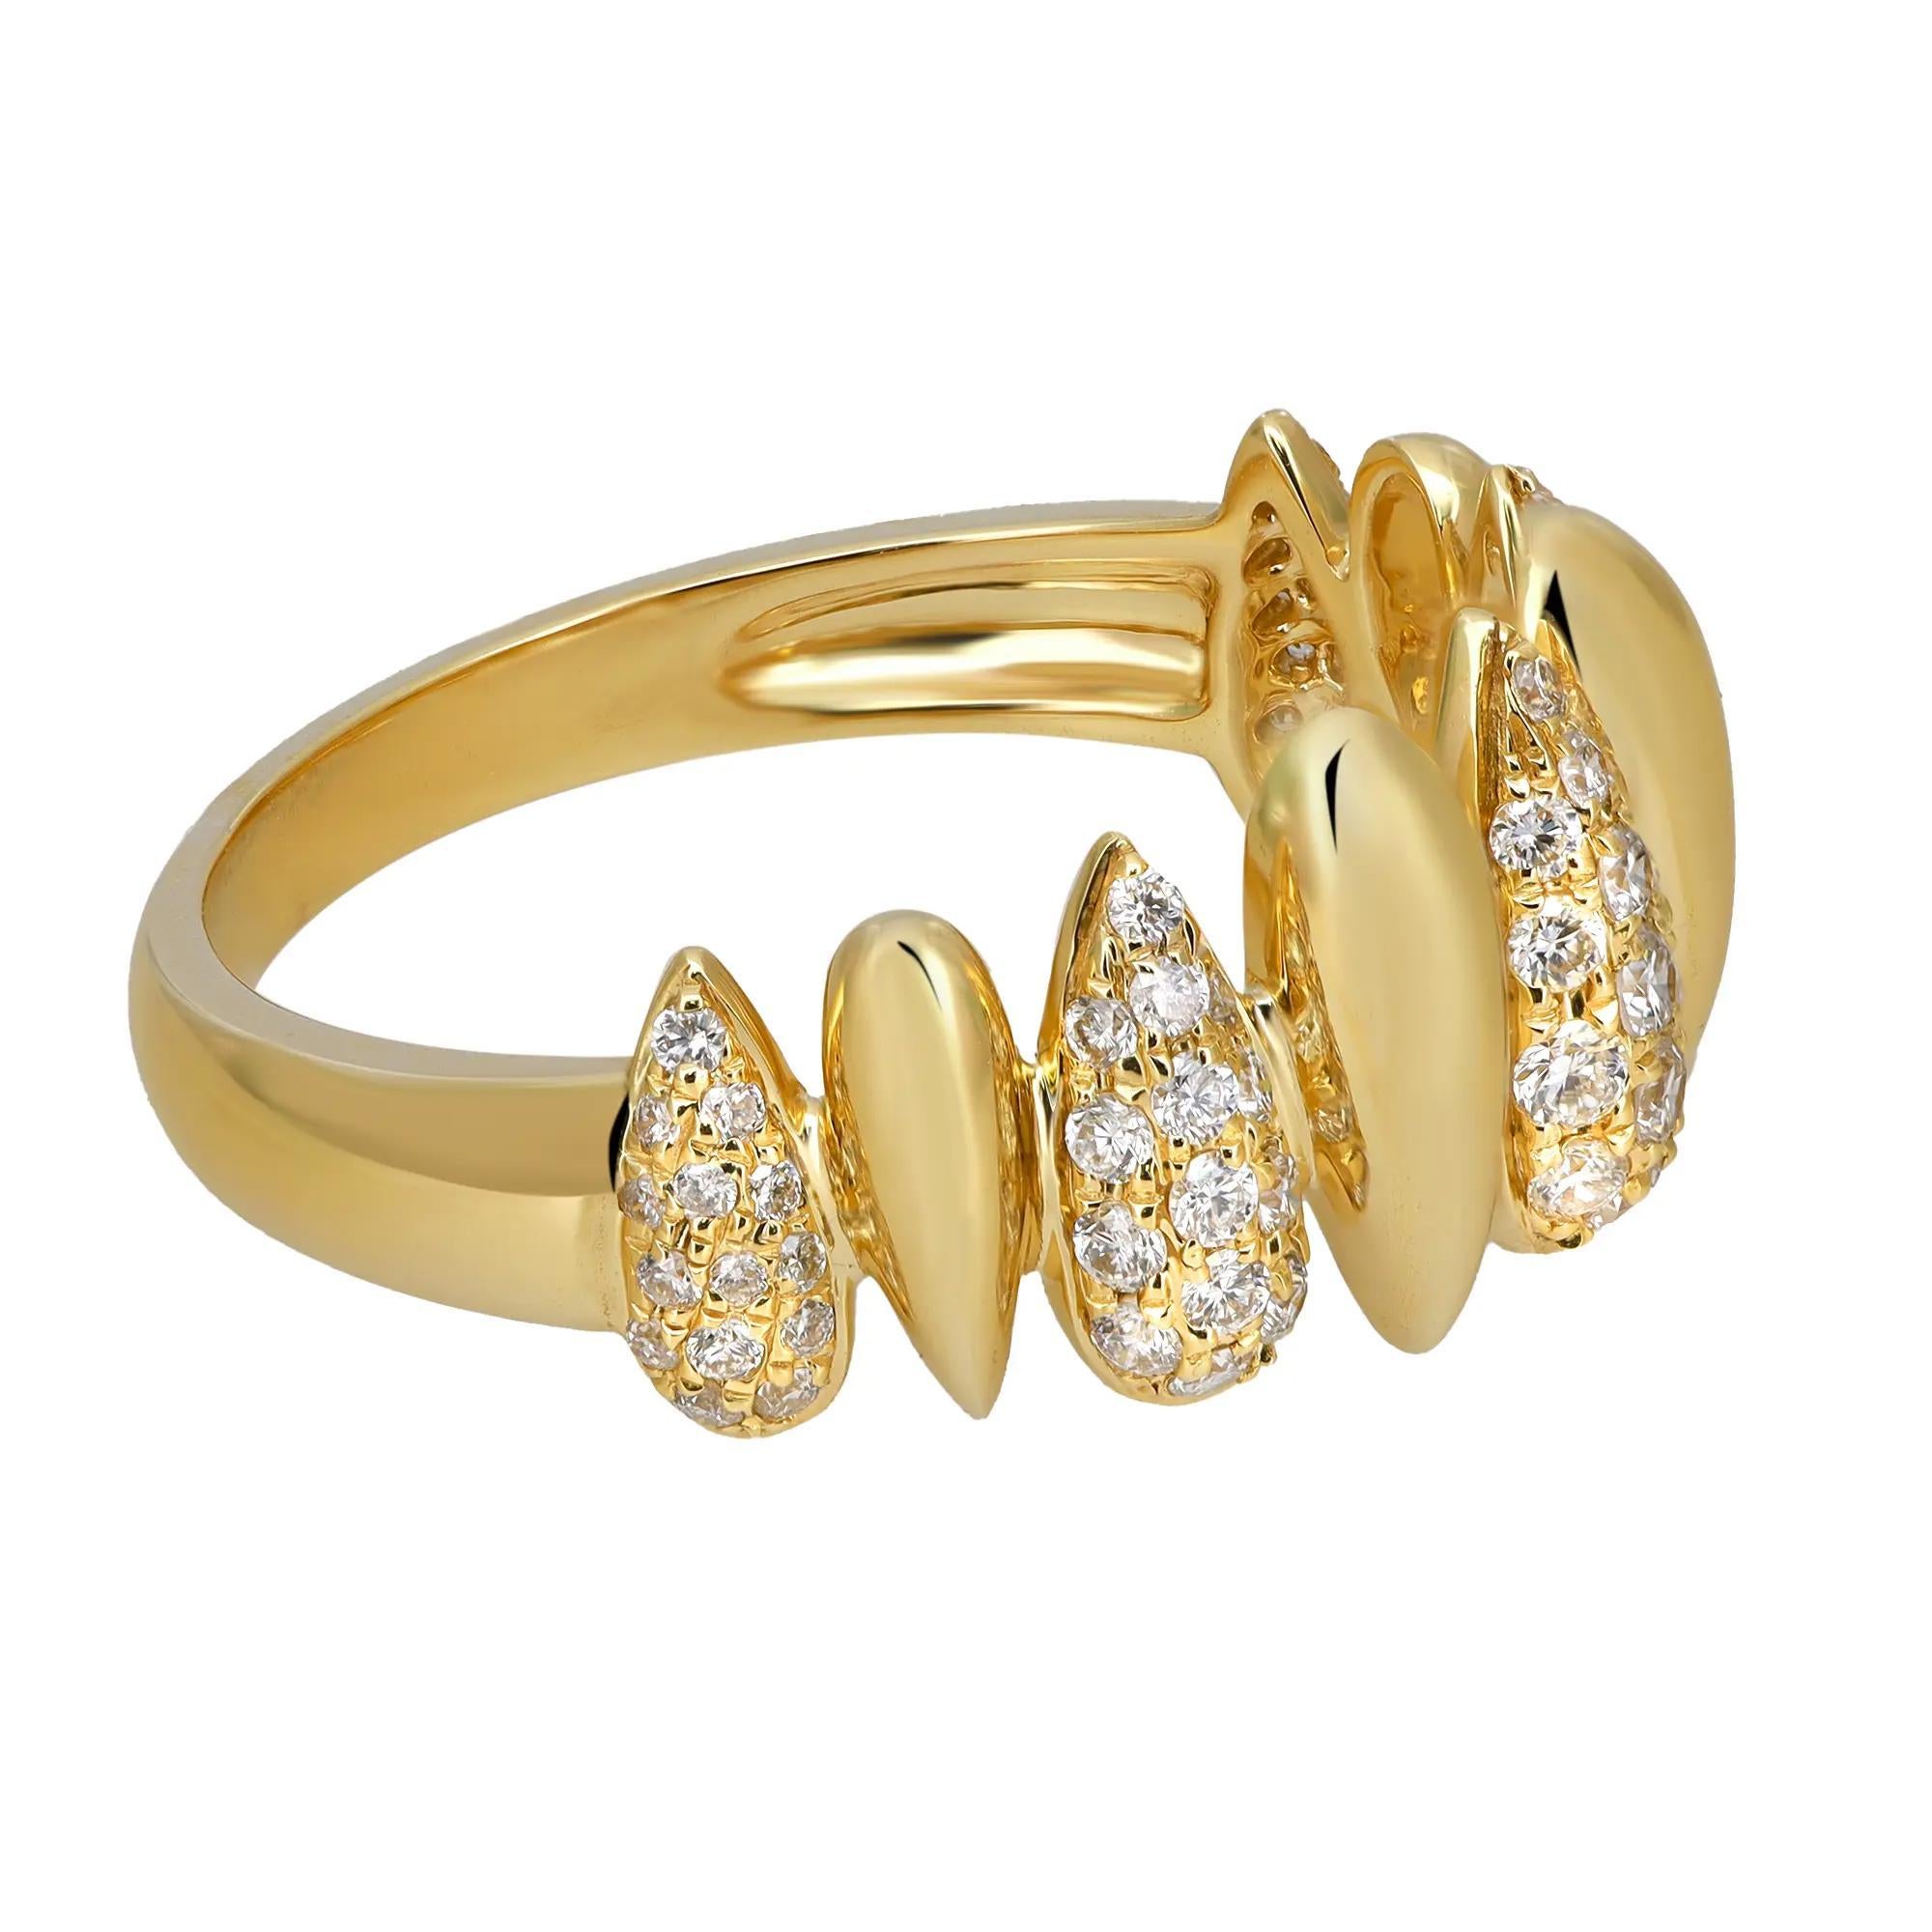 This beautiful diamond multi drop shape band ring is all about sparkle and glamour. Crafted in high polished 18k yellow gold. This ring features 70 pave set round brilliant cut diamonds studded in alternate drop shaped design set halfway through the